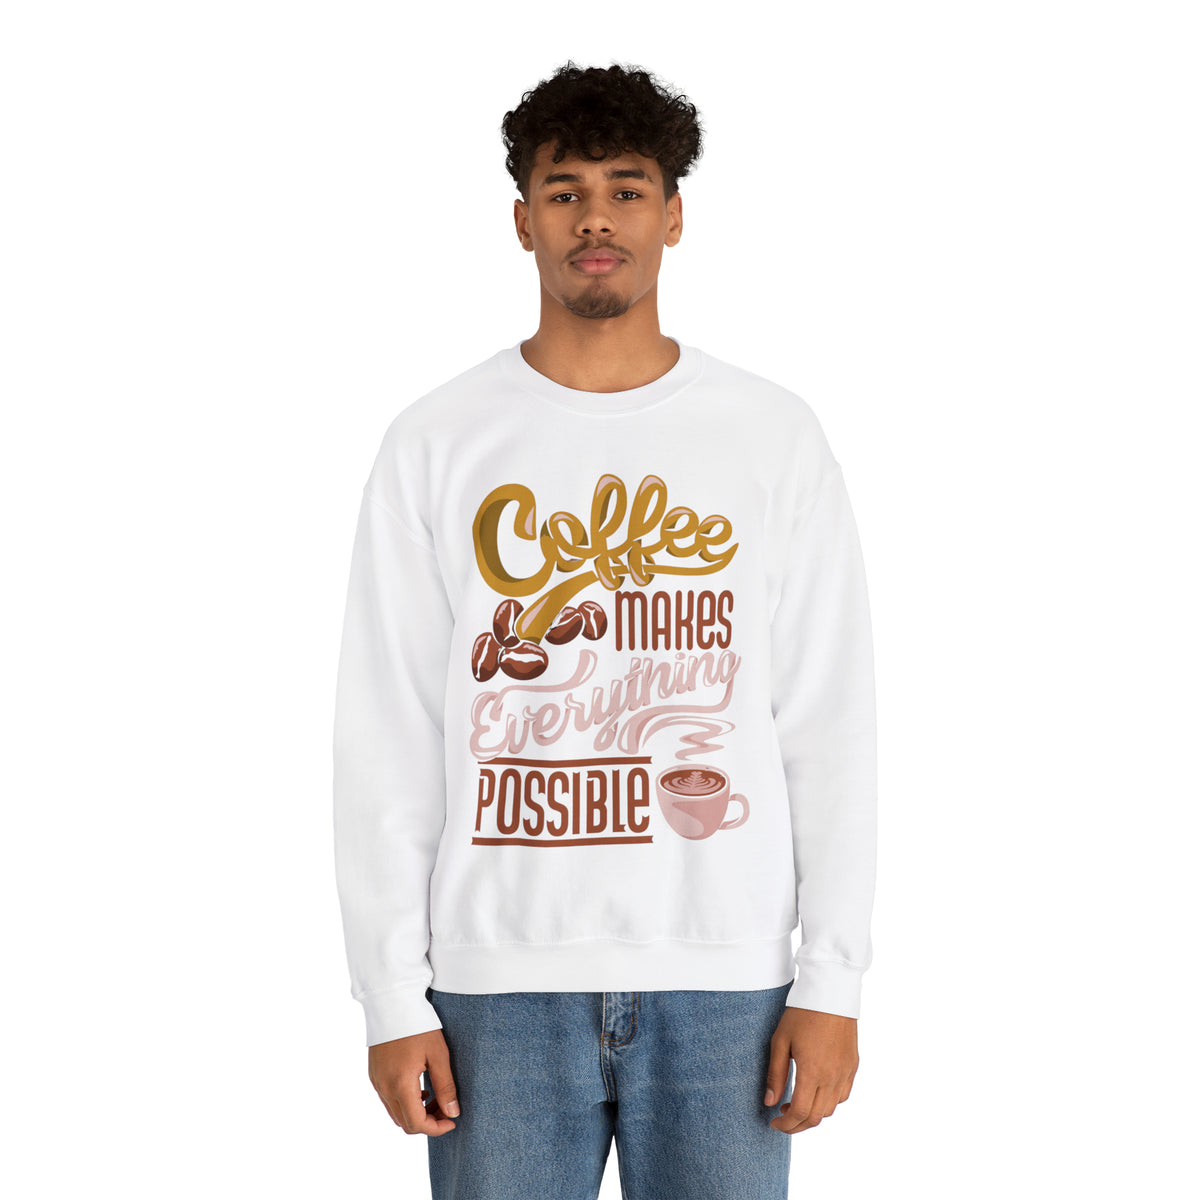 Coffee Makes Everything Possible Sweatshirt, Coffee sweater, Cute Coffee lovers Sweatshirt, Trendy sweater, Sweatshirts, Cute Sweatshirt, Oversized Fit, Cozy Sweaters